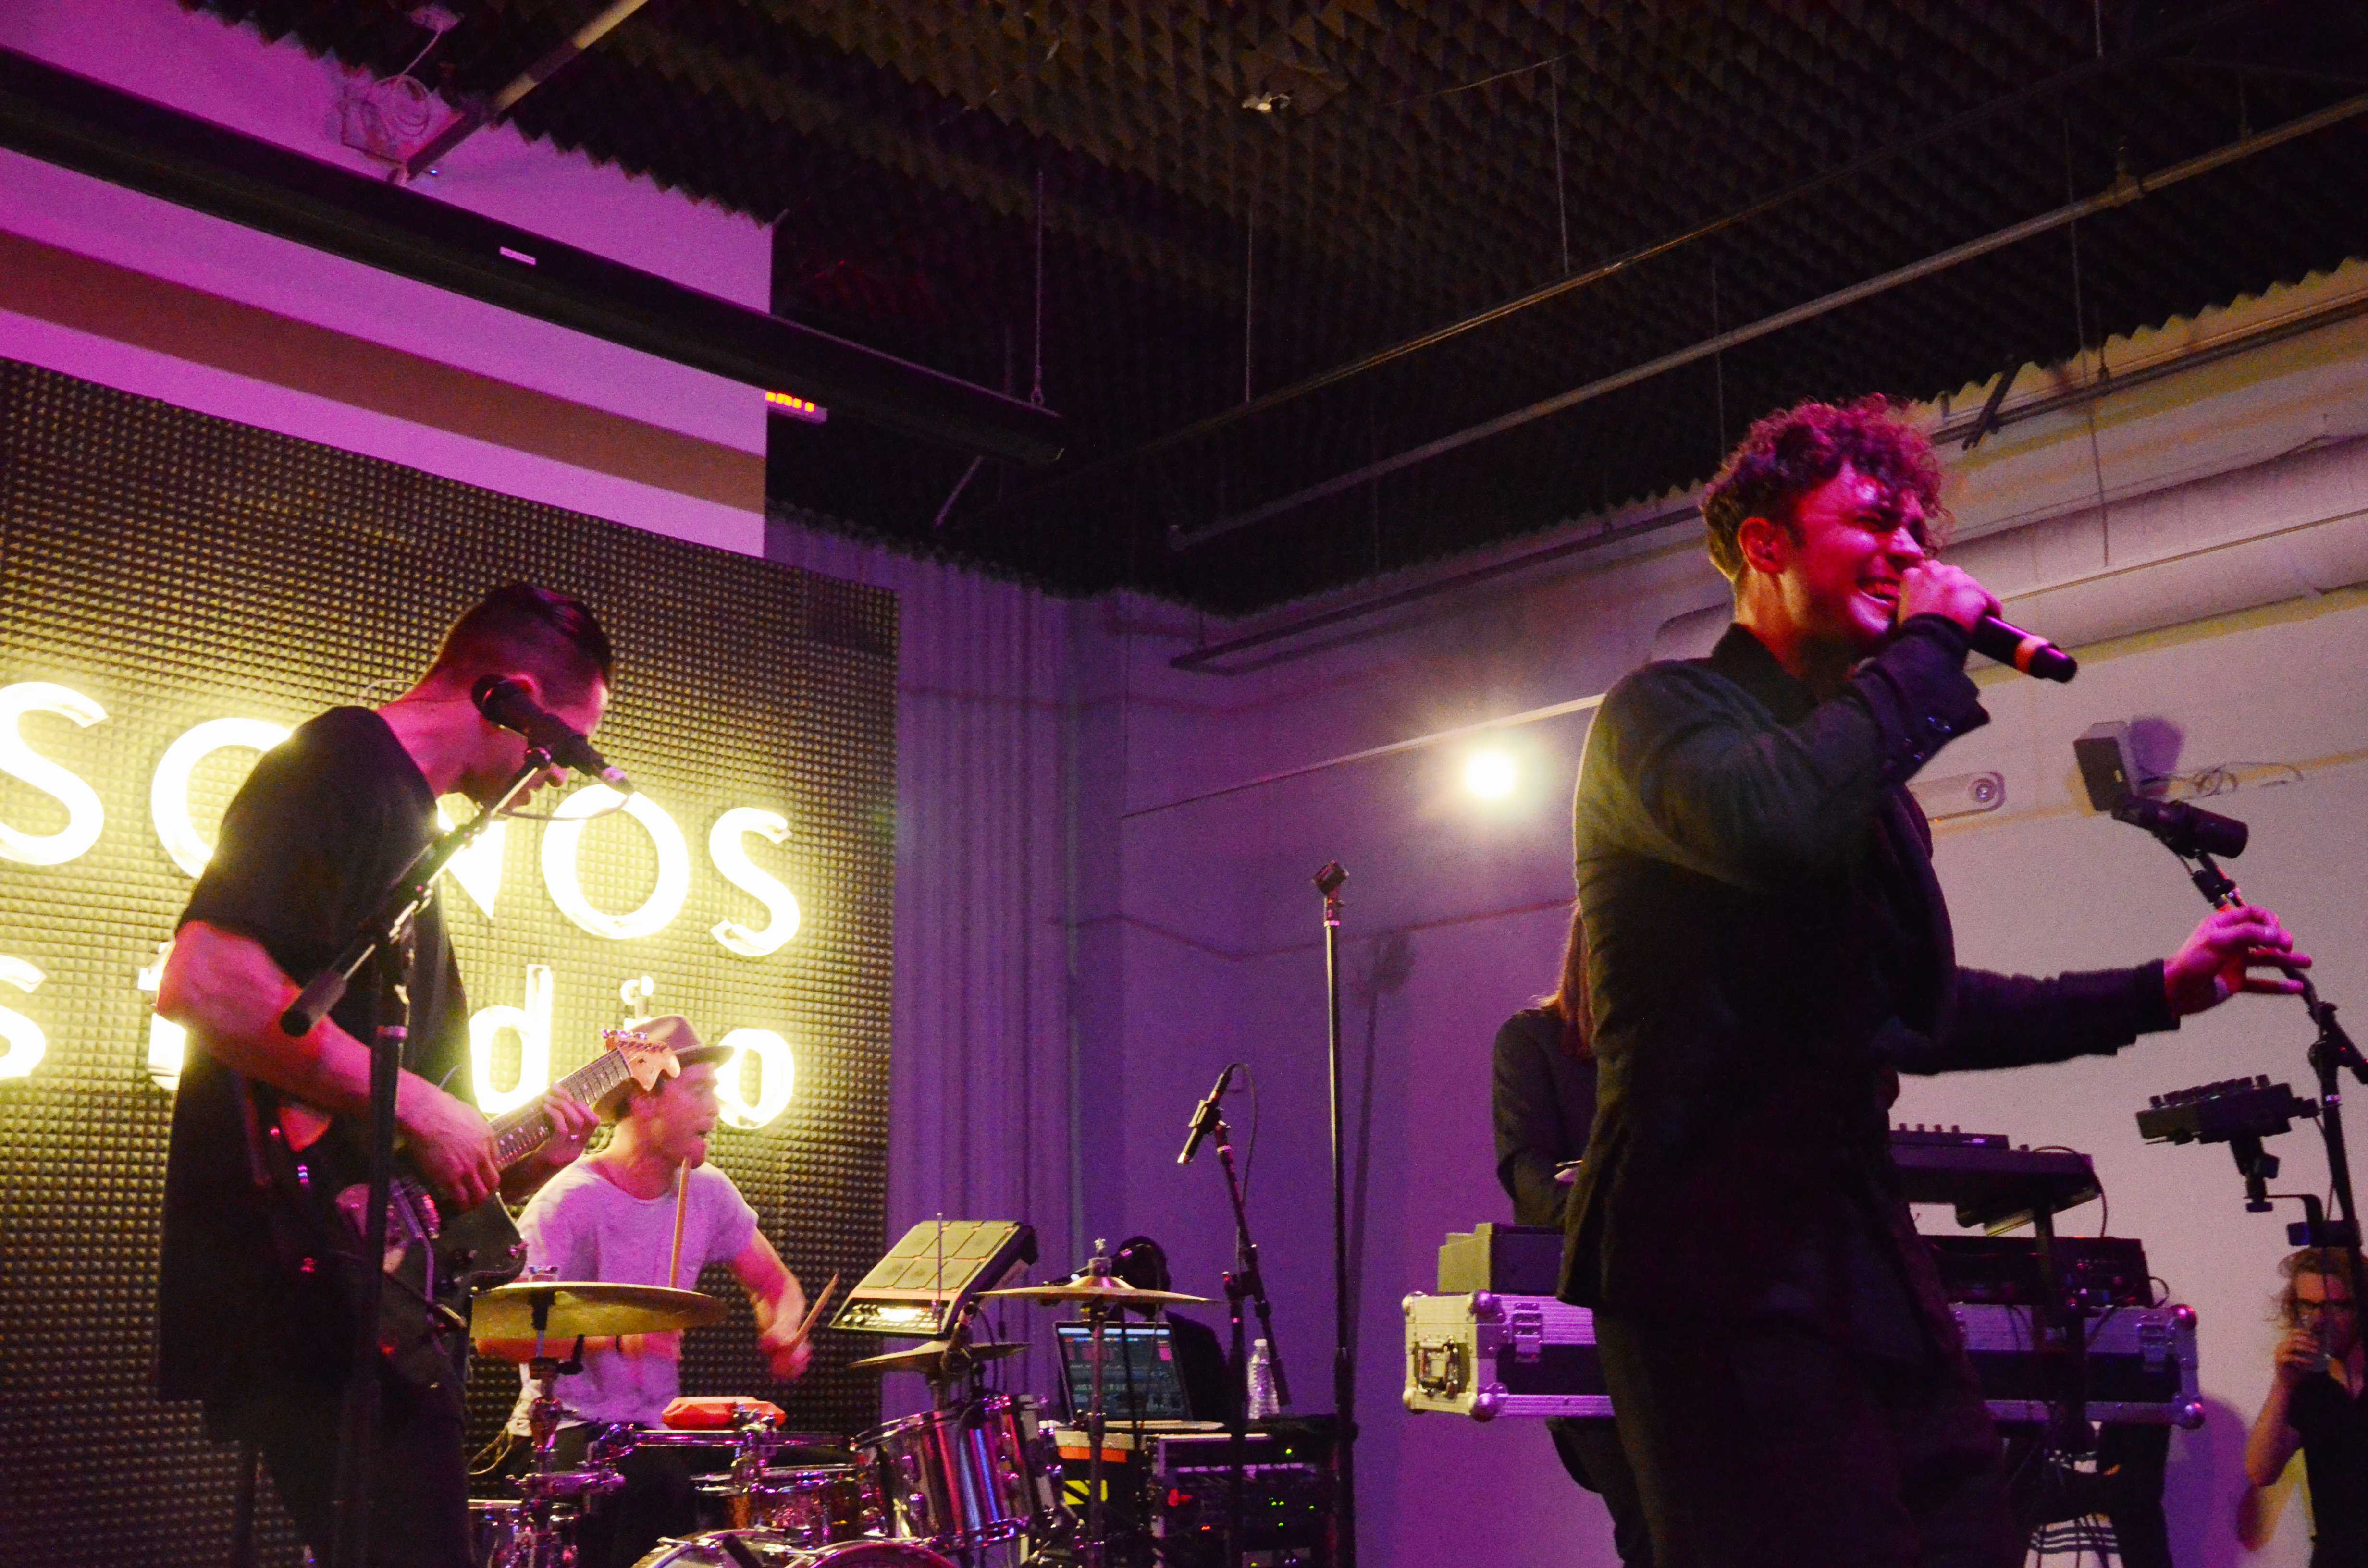 Mikky+Ekko+performs+a+small+set+of+songs+at+the+Sonos+Studios+in+Hollywood+presented+by+Pandora.